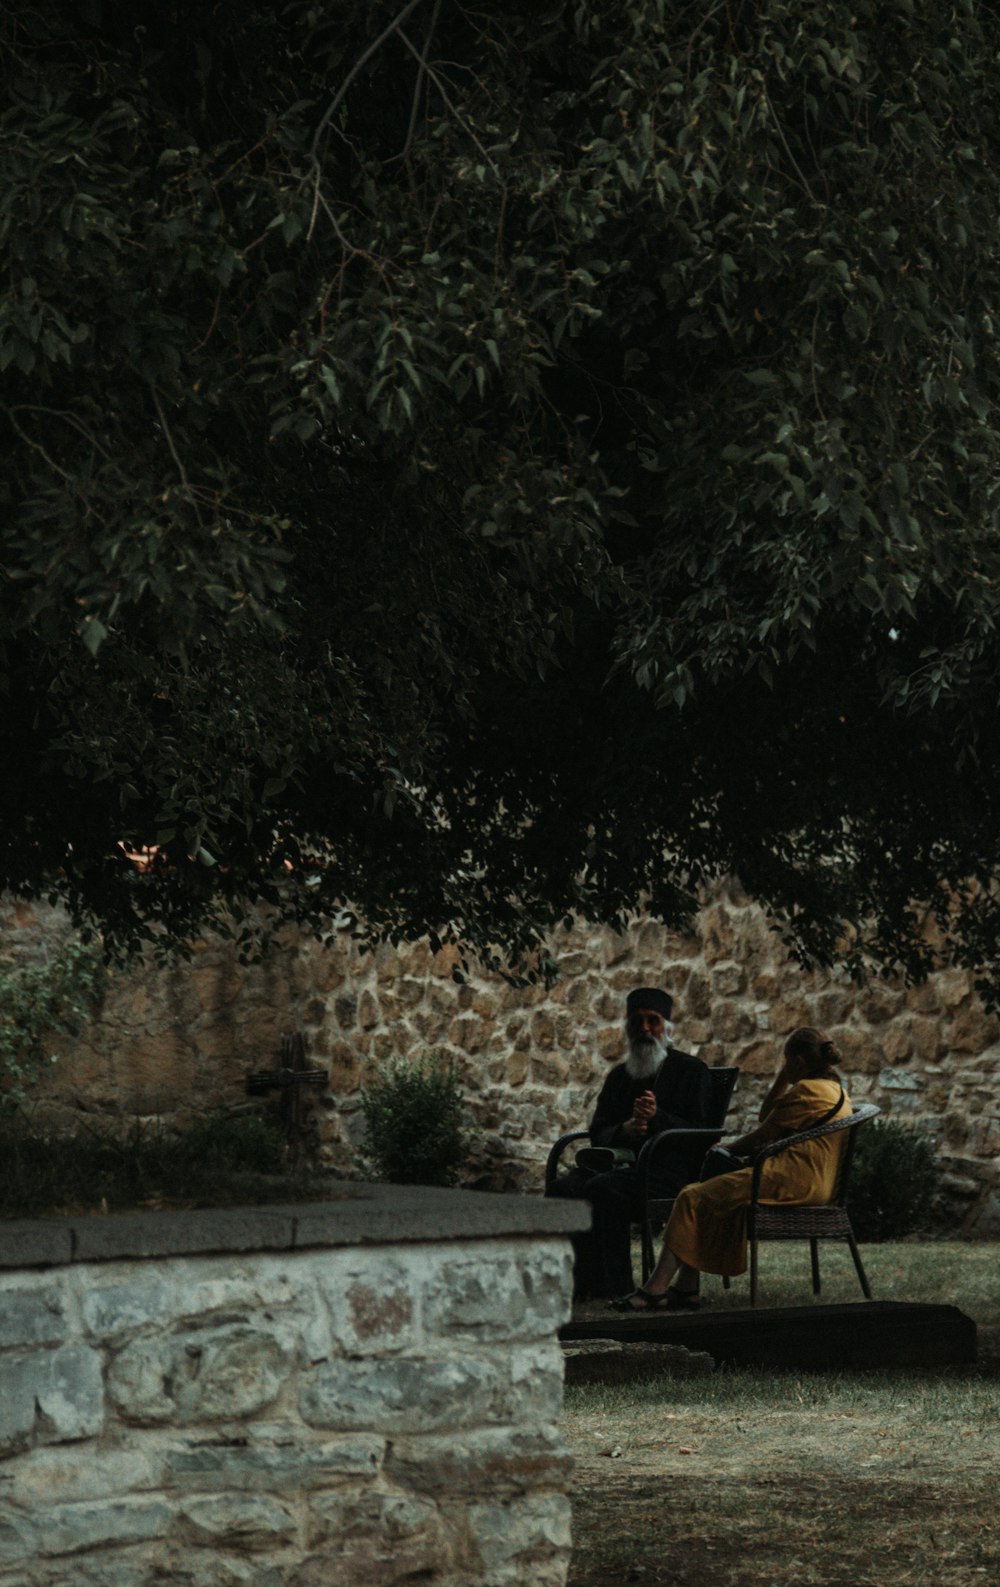 a man and woman sitting on a bench under a tree